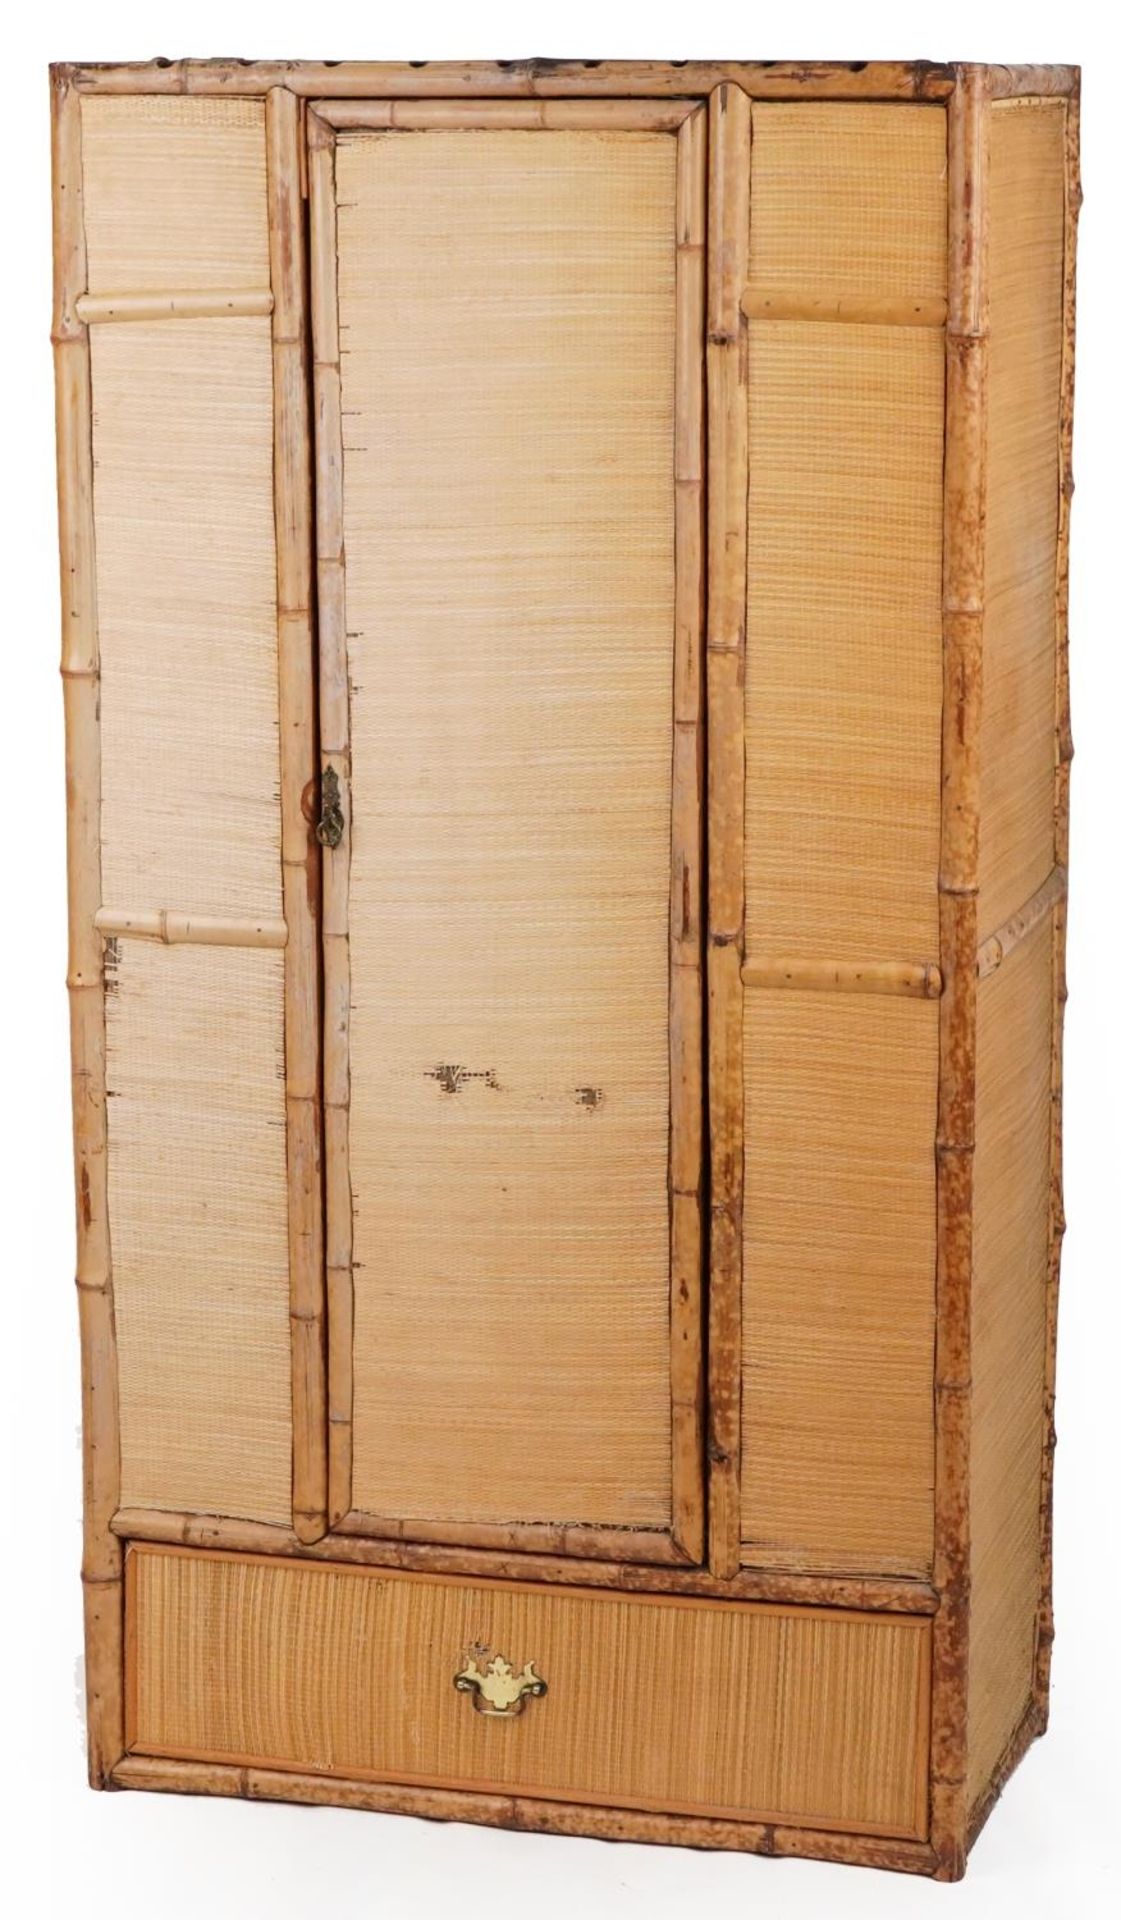 Victorian aesthetic bamboo and hessian style wardrobe with Japanned interior embossed C P